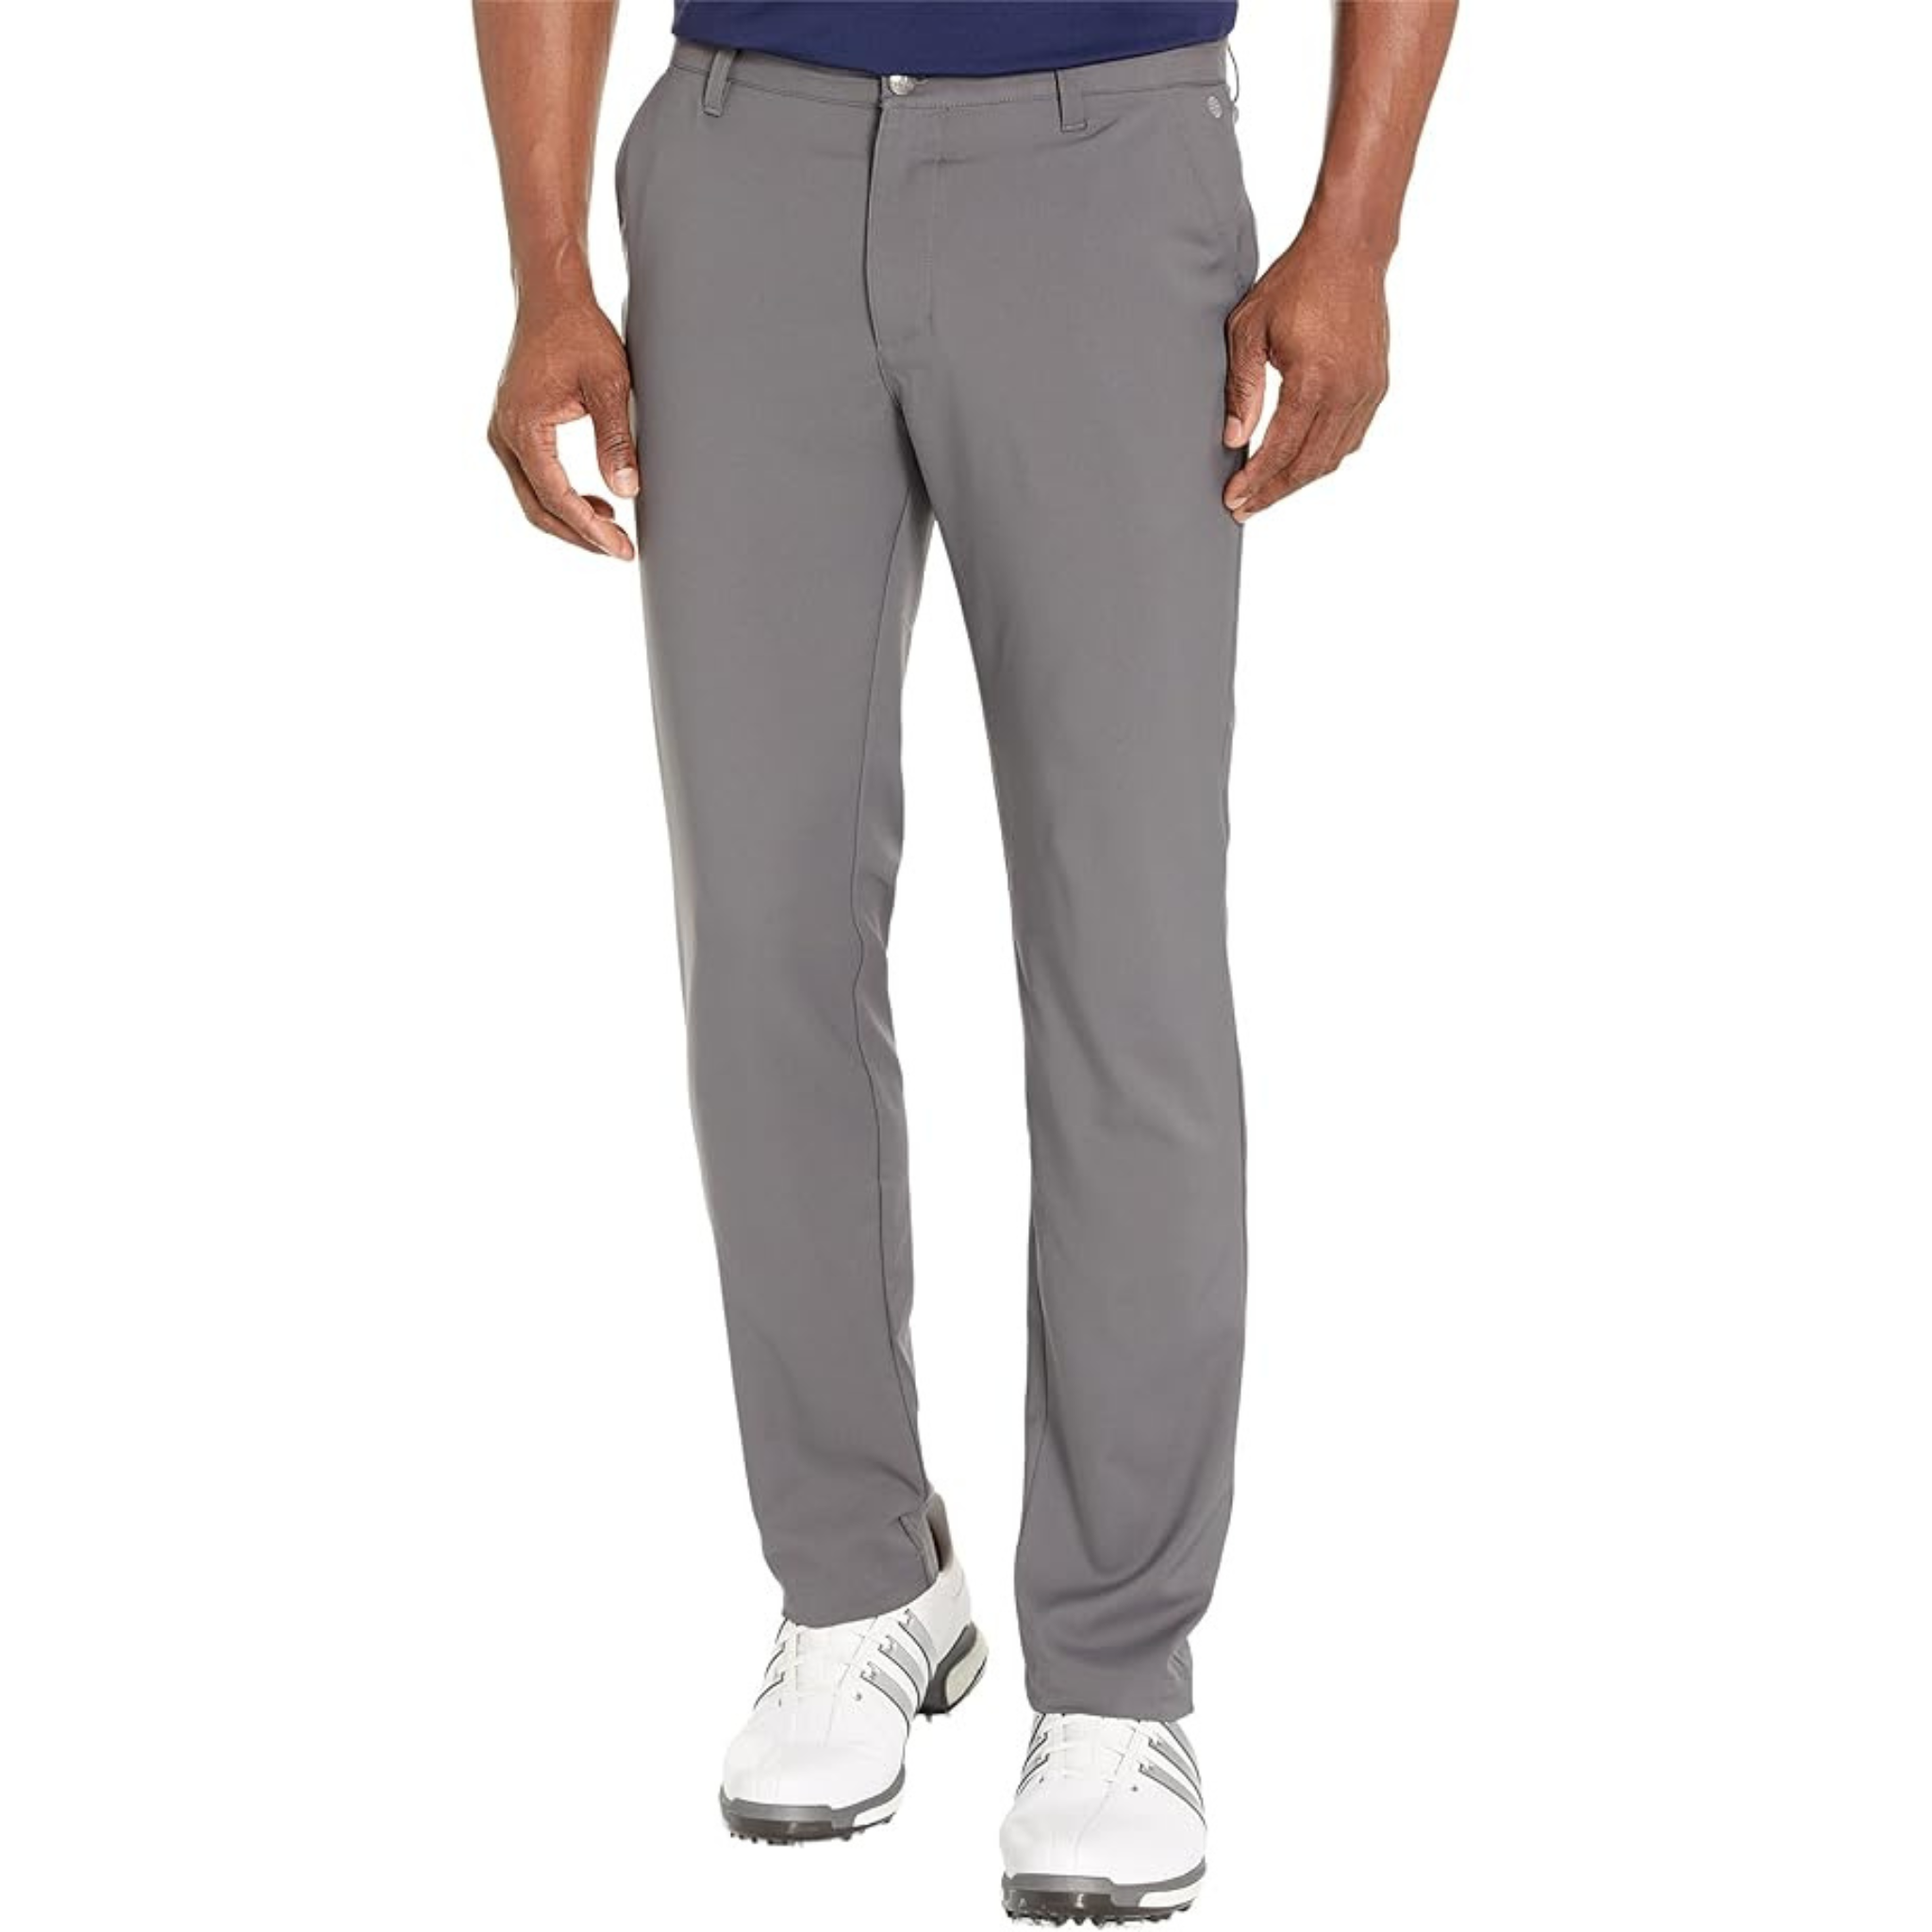 Adidas Ultimate365 Tapered Pants (MANY COLORS)